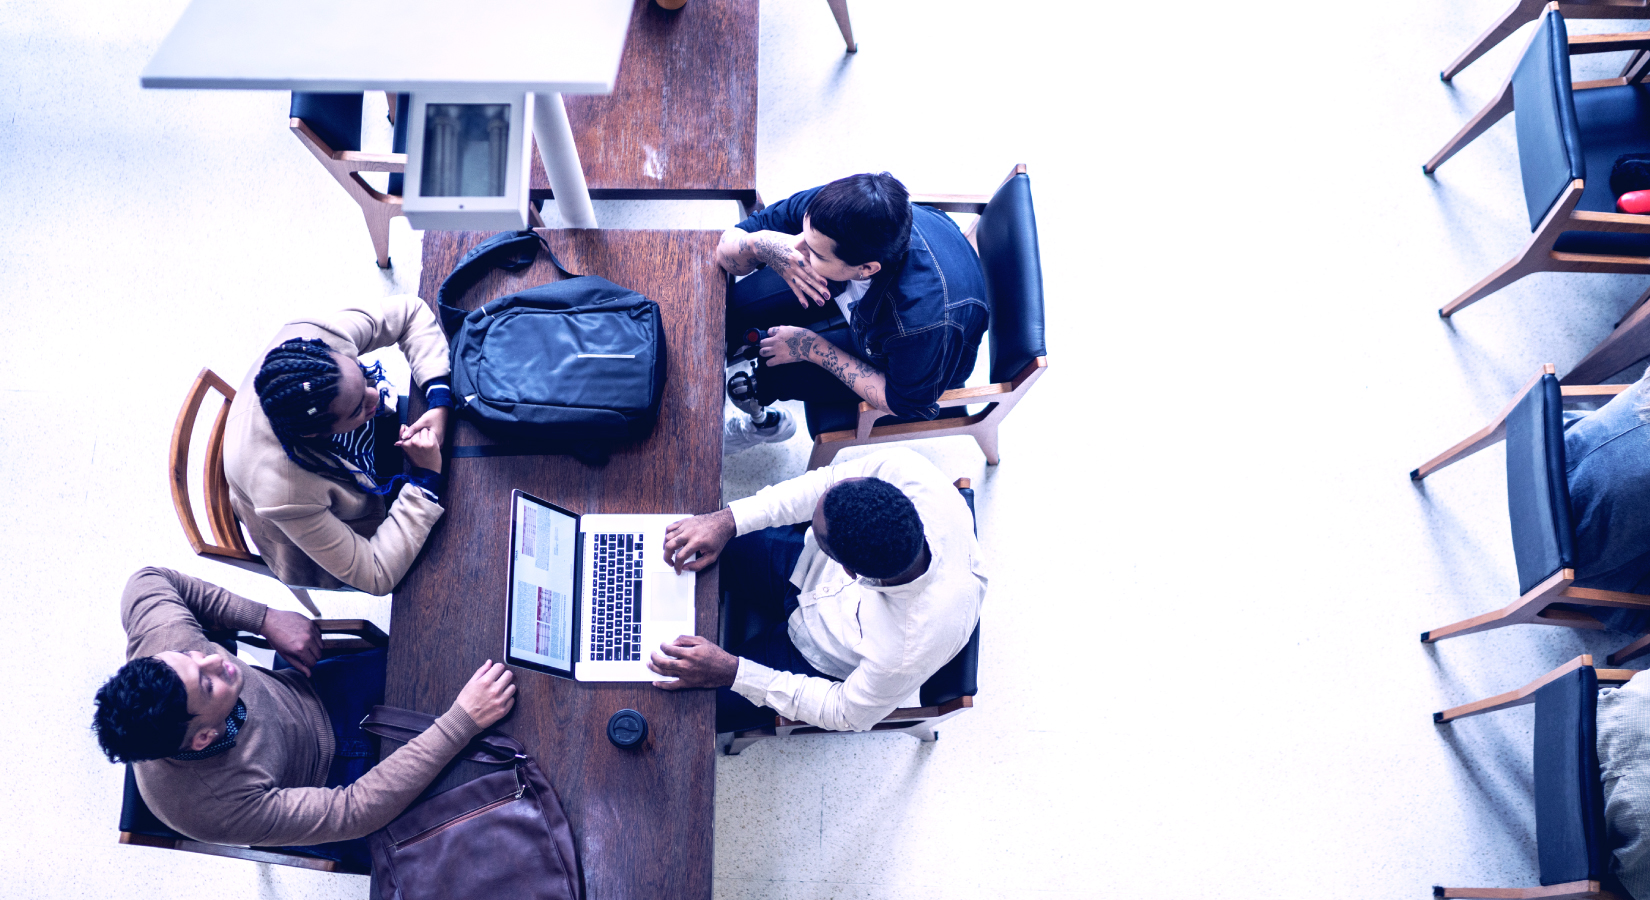 Group of people viewed from above working with laptops in office environment